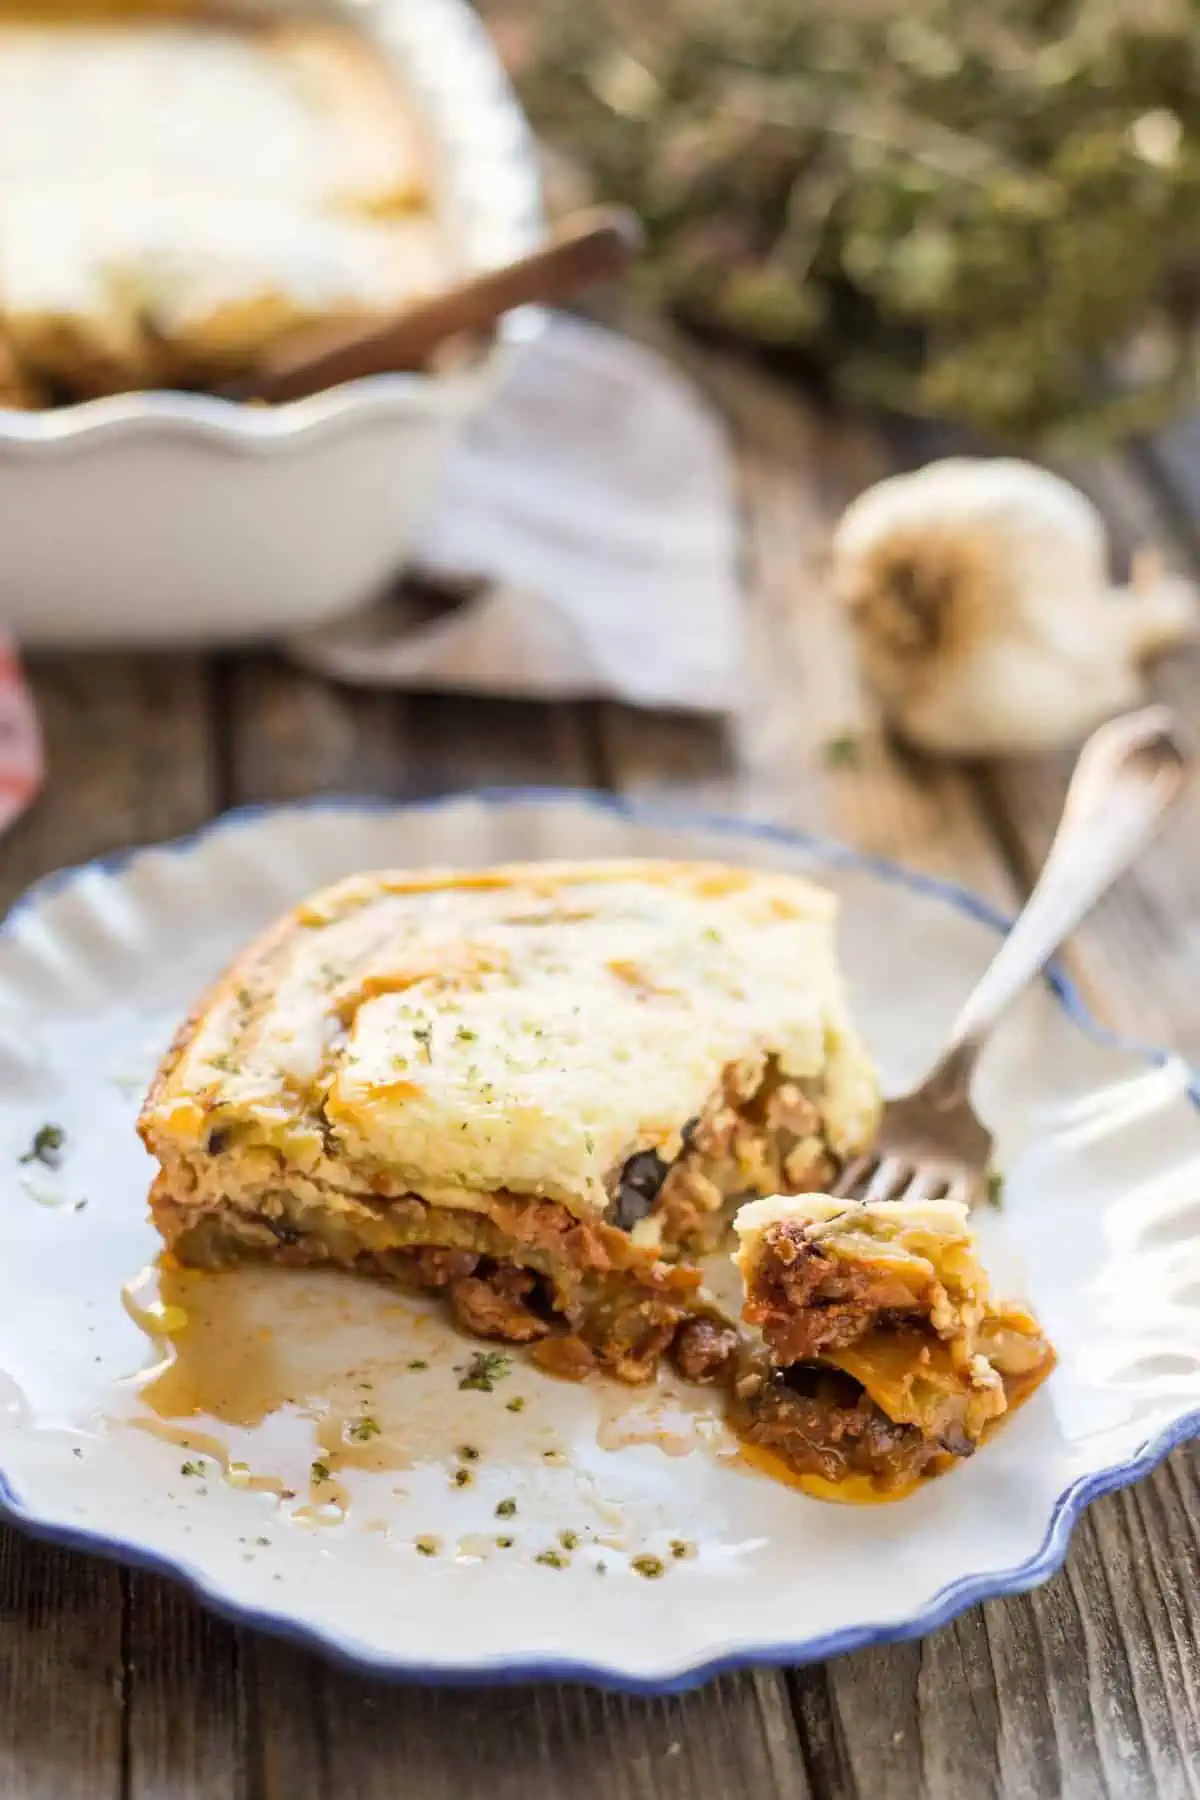 Corner slice of moussaka on a dinner plate with a fork holding a bite.